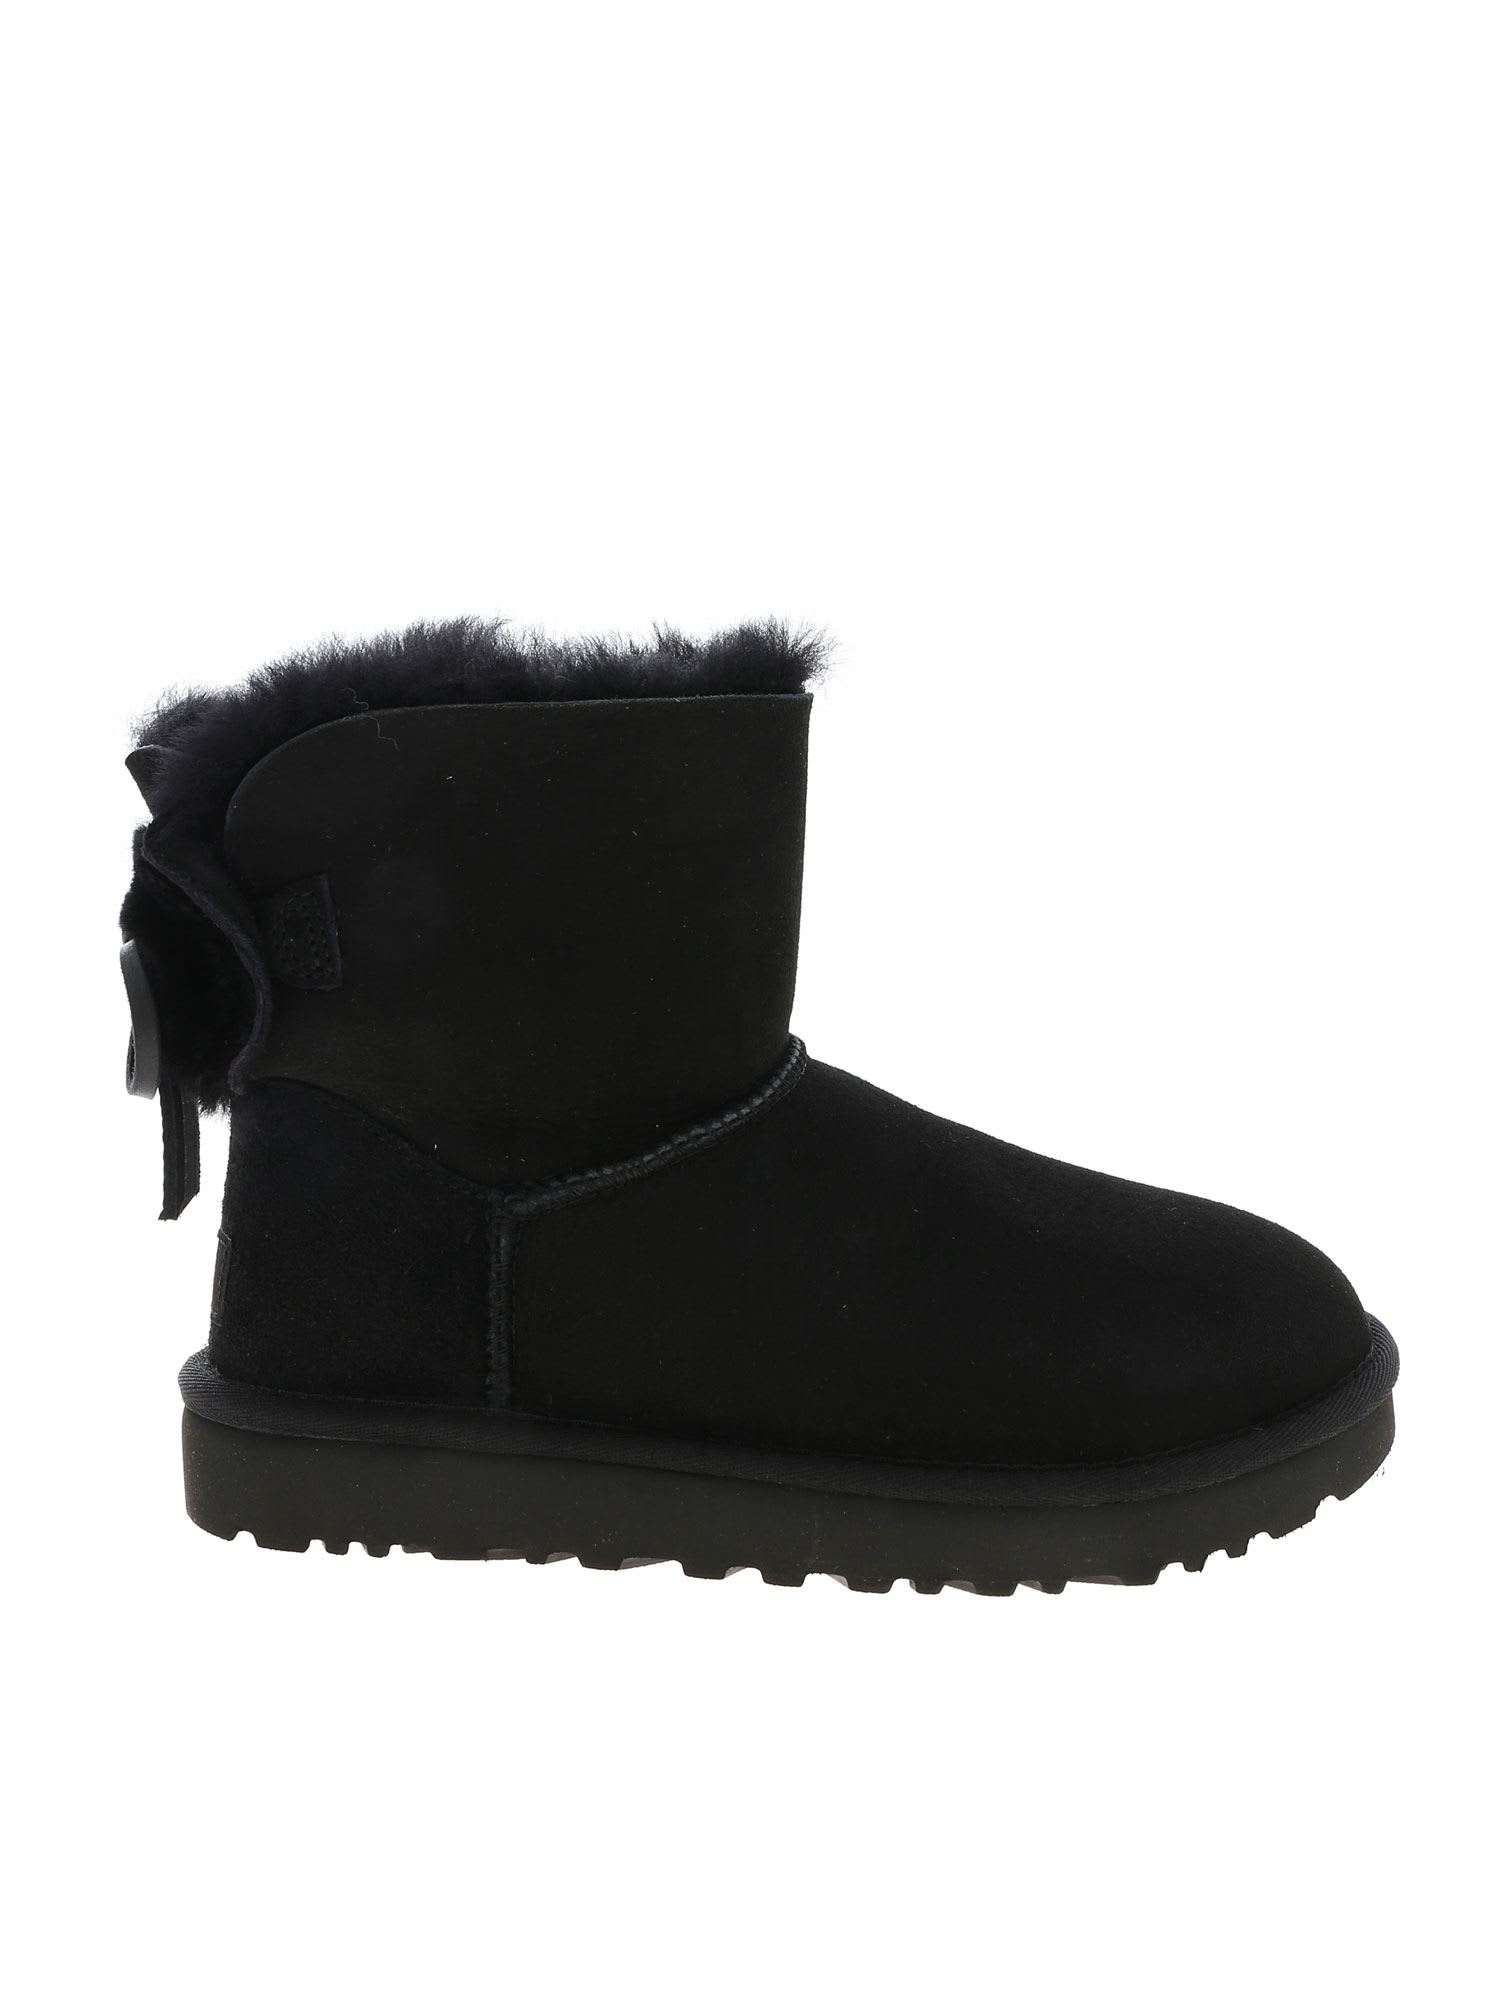 ugg double bow boots